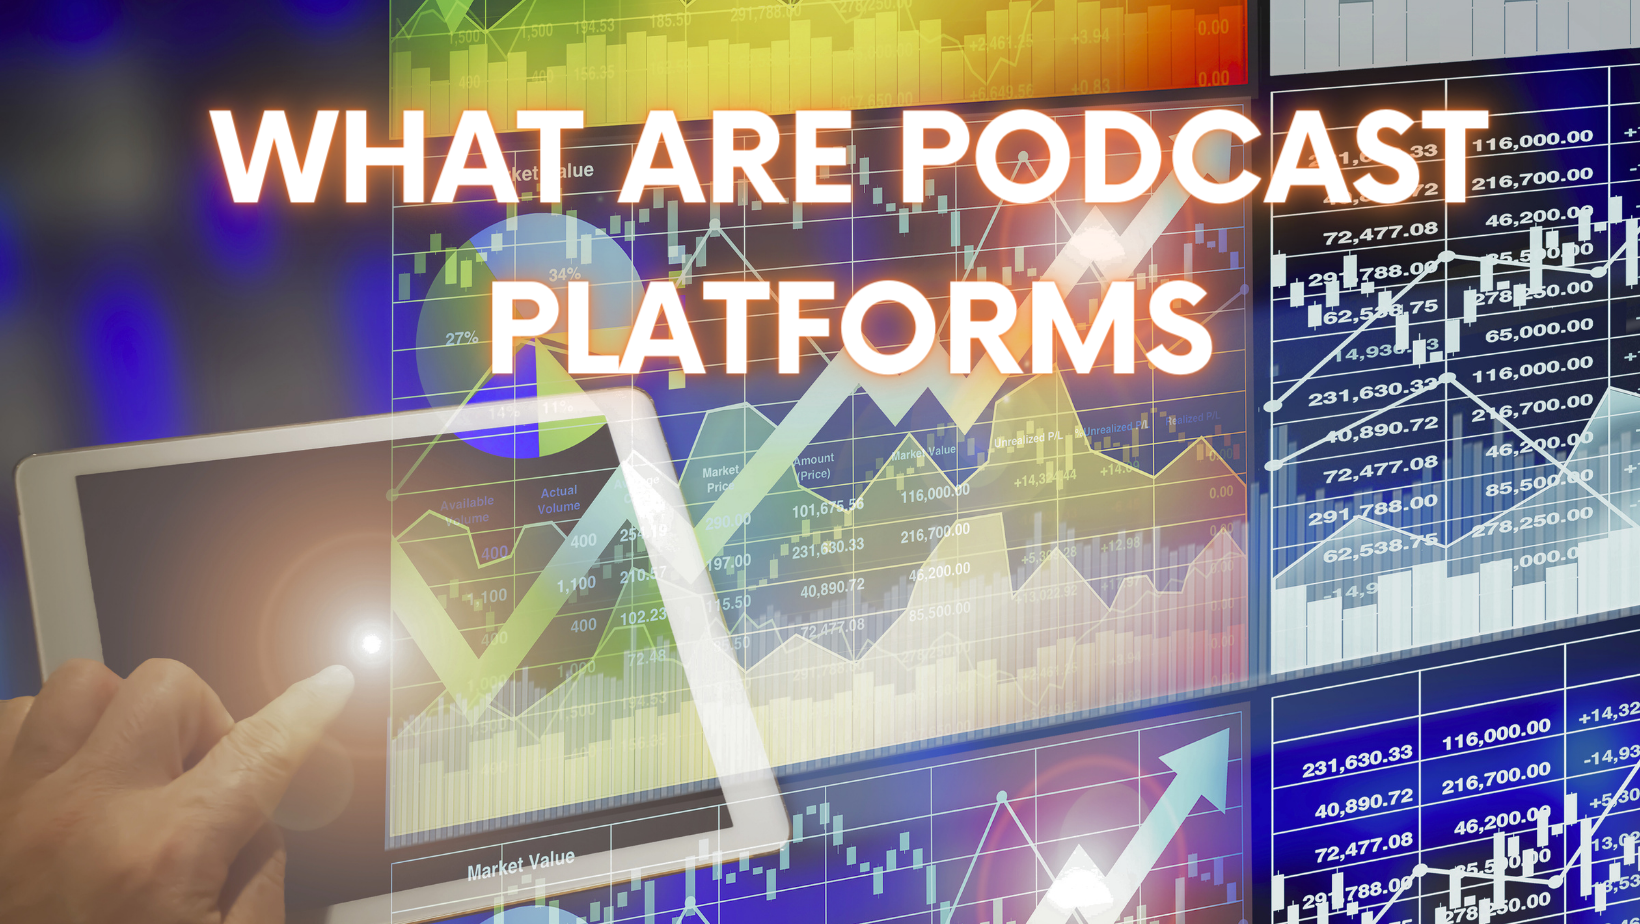 What Are Podcast Platforms?